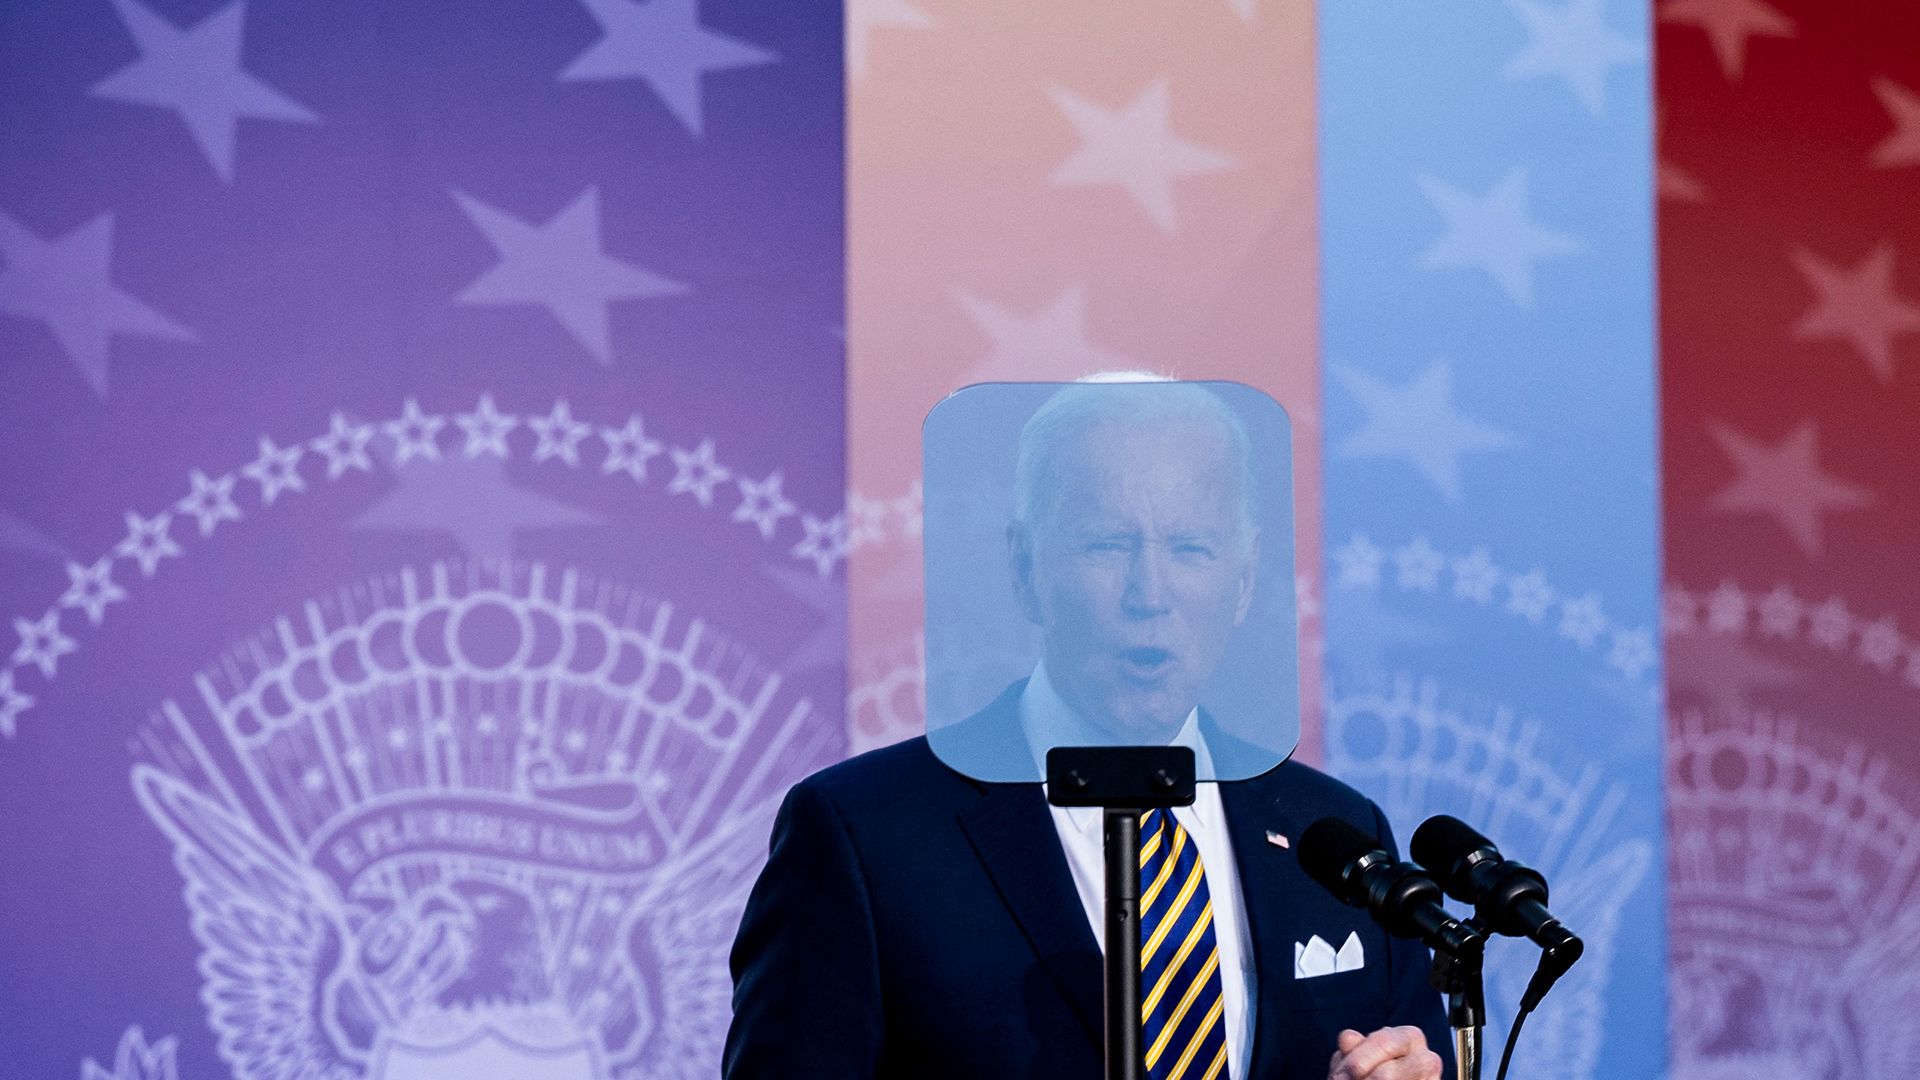 President Biden is seen through the screen of a TelePrompTer as he speaks in Georgia on Tuesday.